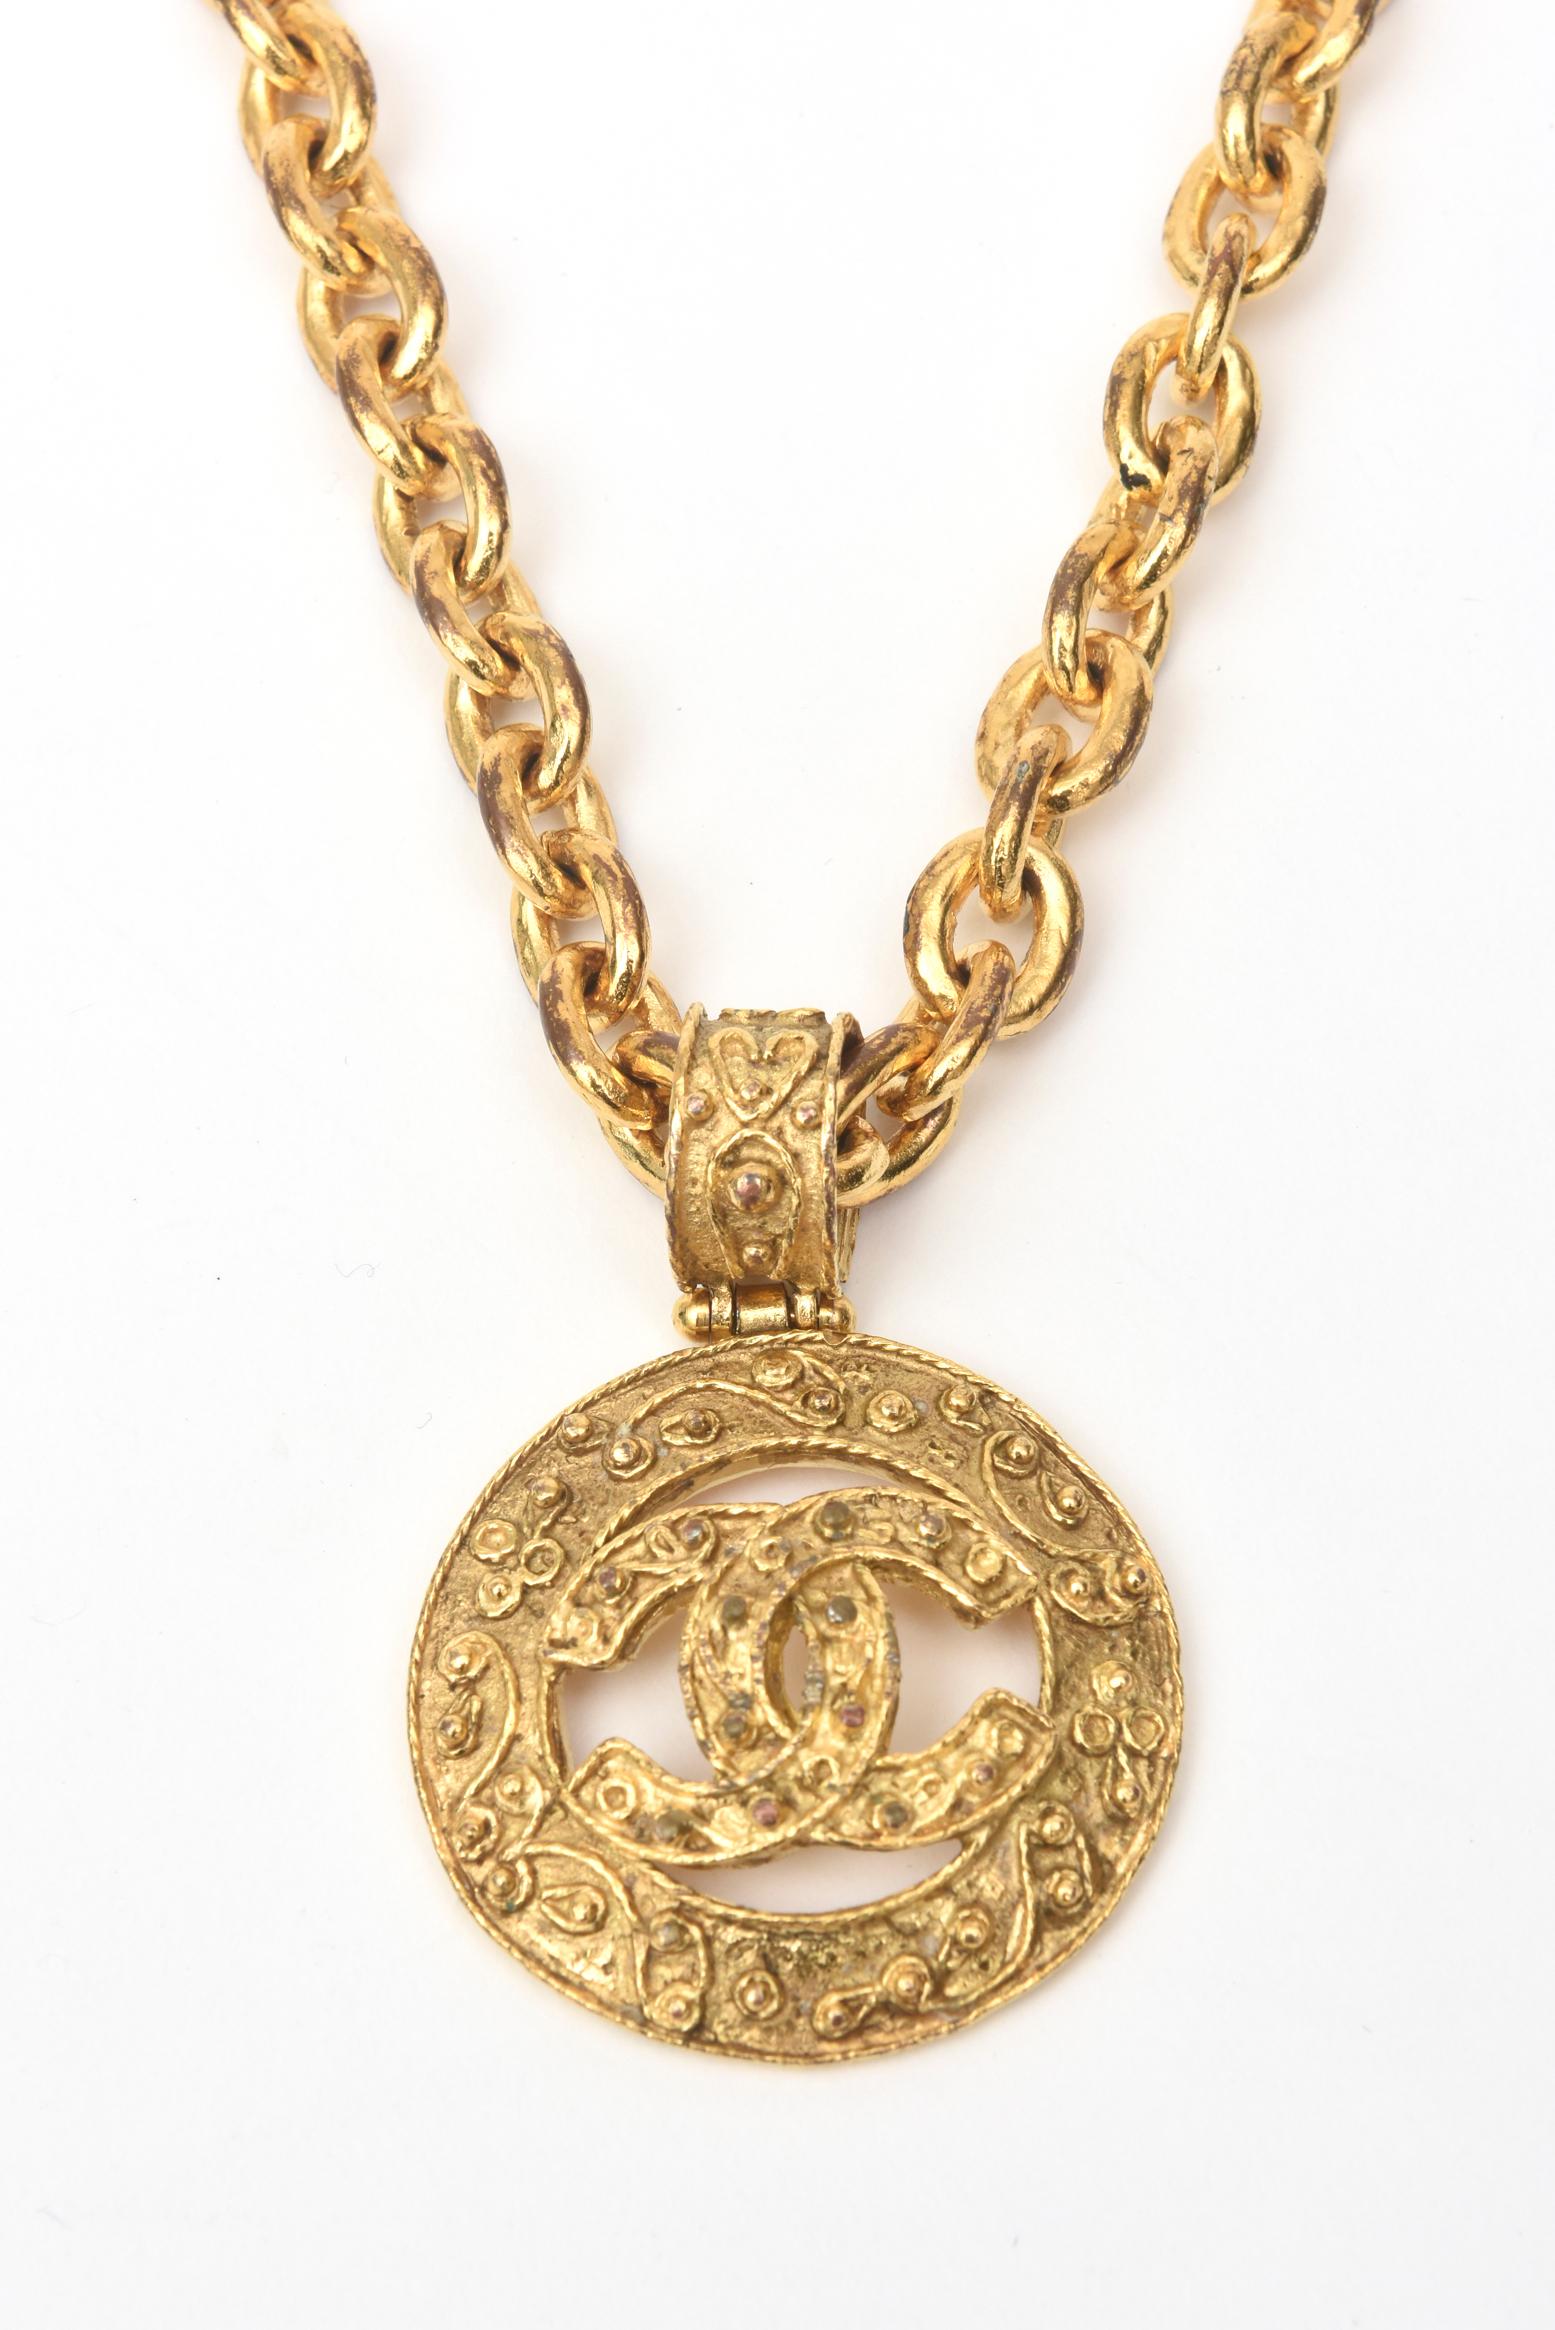 This authentic fabulous Chanel chunky gold plated hammered medallion chain necklace has the interlocking CC's. It is from the 1984. It is hallmarked Chanel 